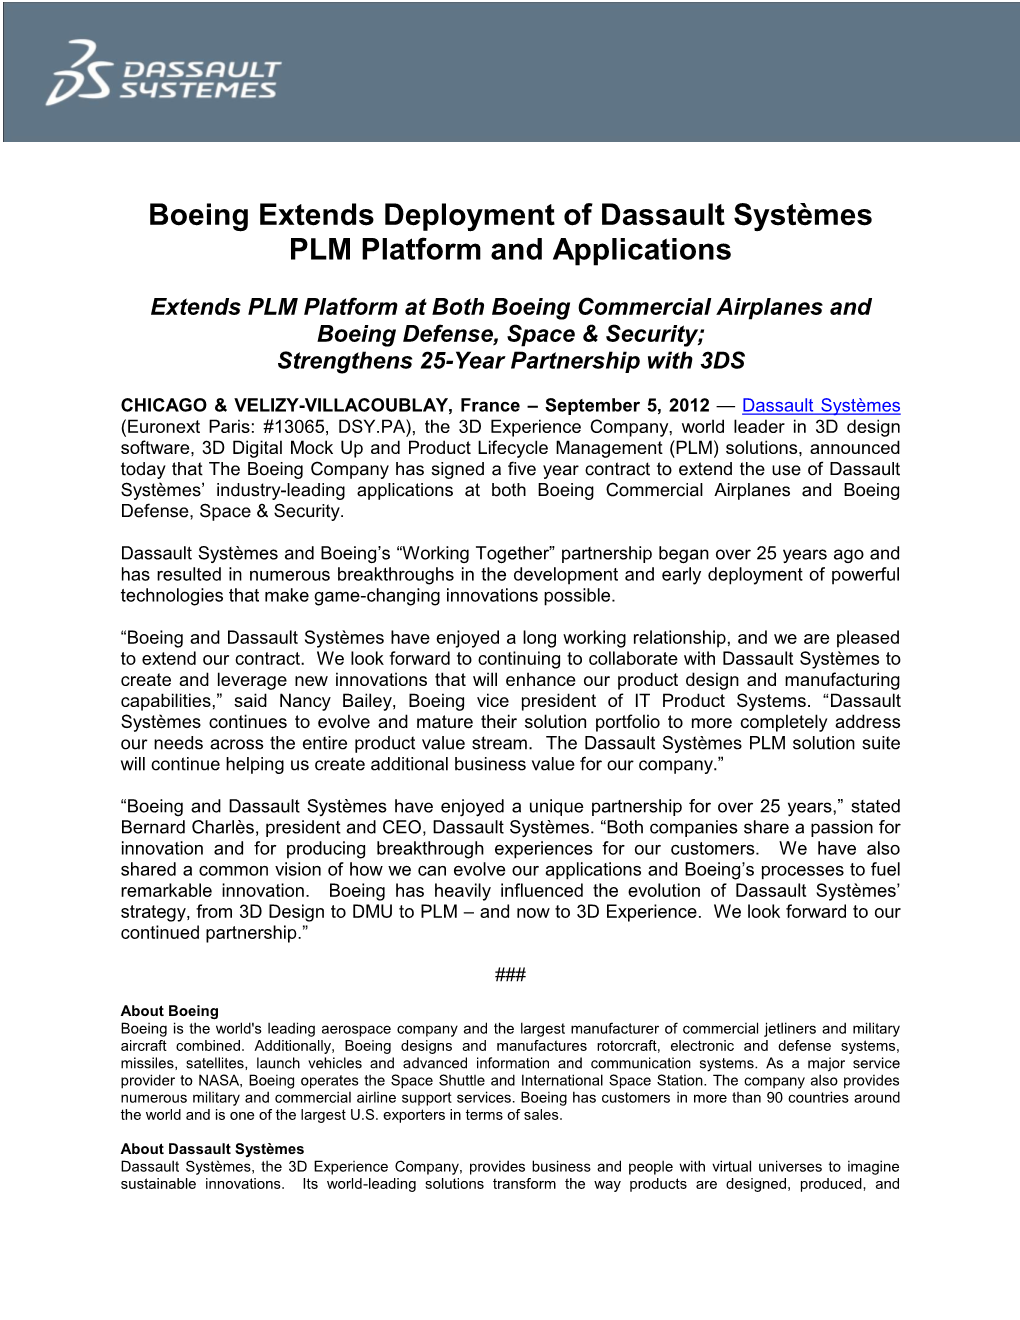 Boeing Extends Deployment of Dassault Systèmes PLM Platform and Applications